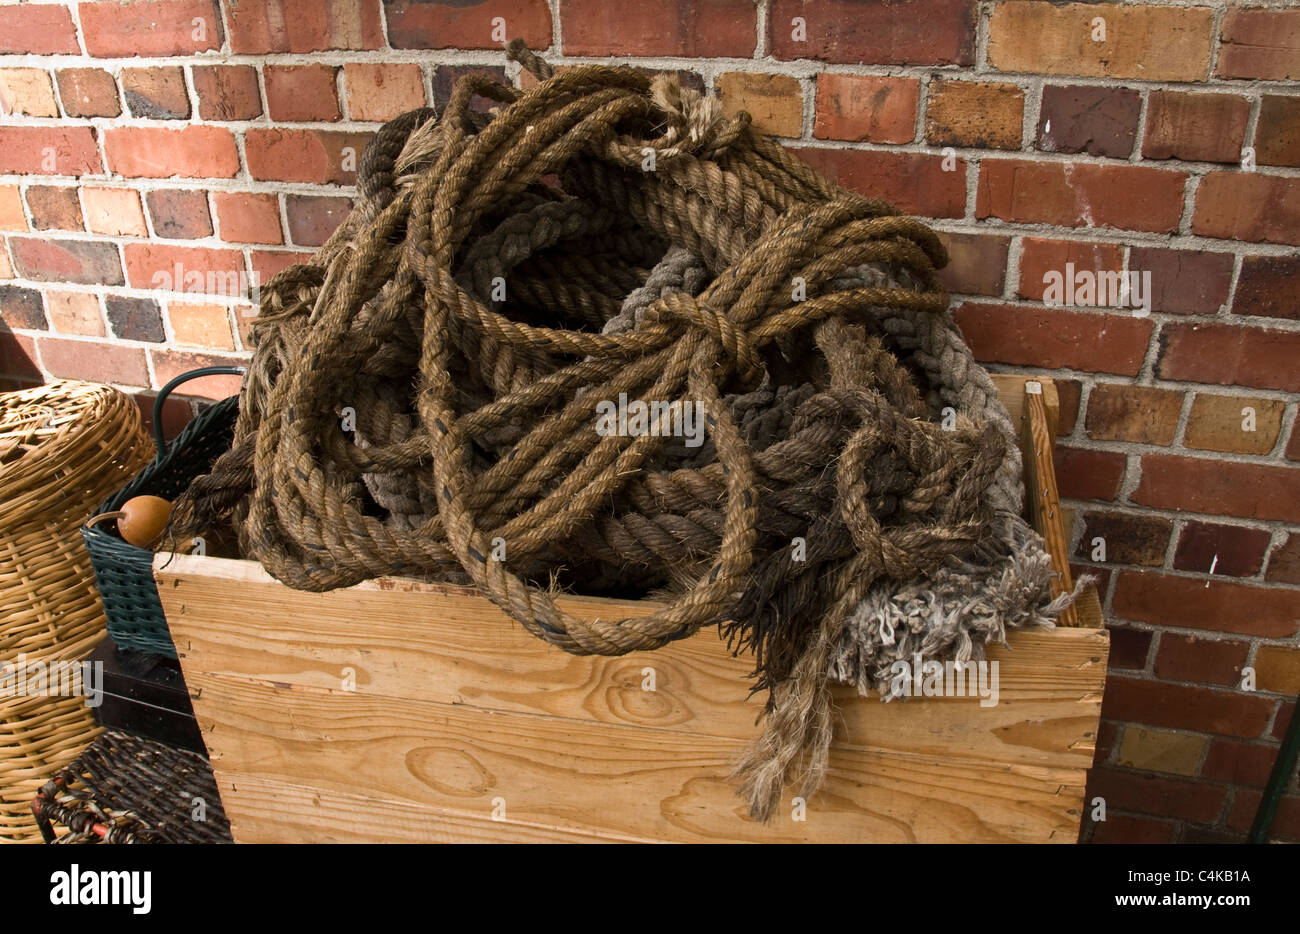 Hanks of old rope in a wooden box in front of a brick wall Stock Photo